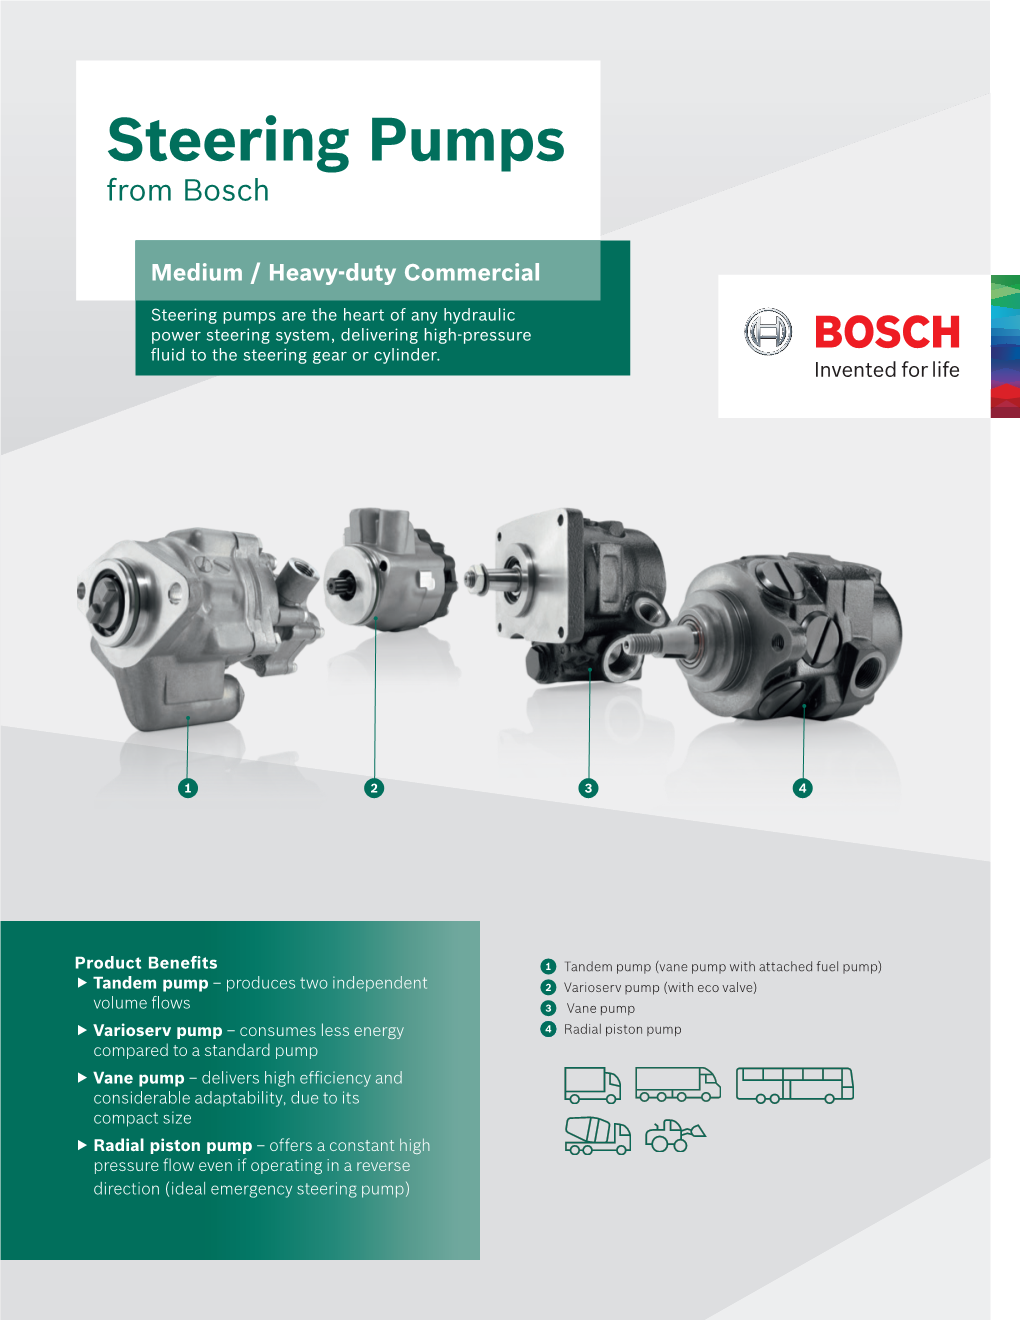 Steering Pumps from Bosch